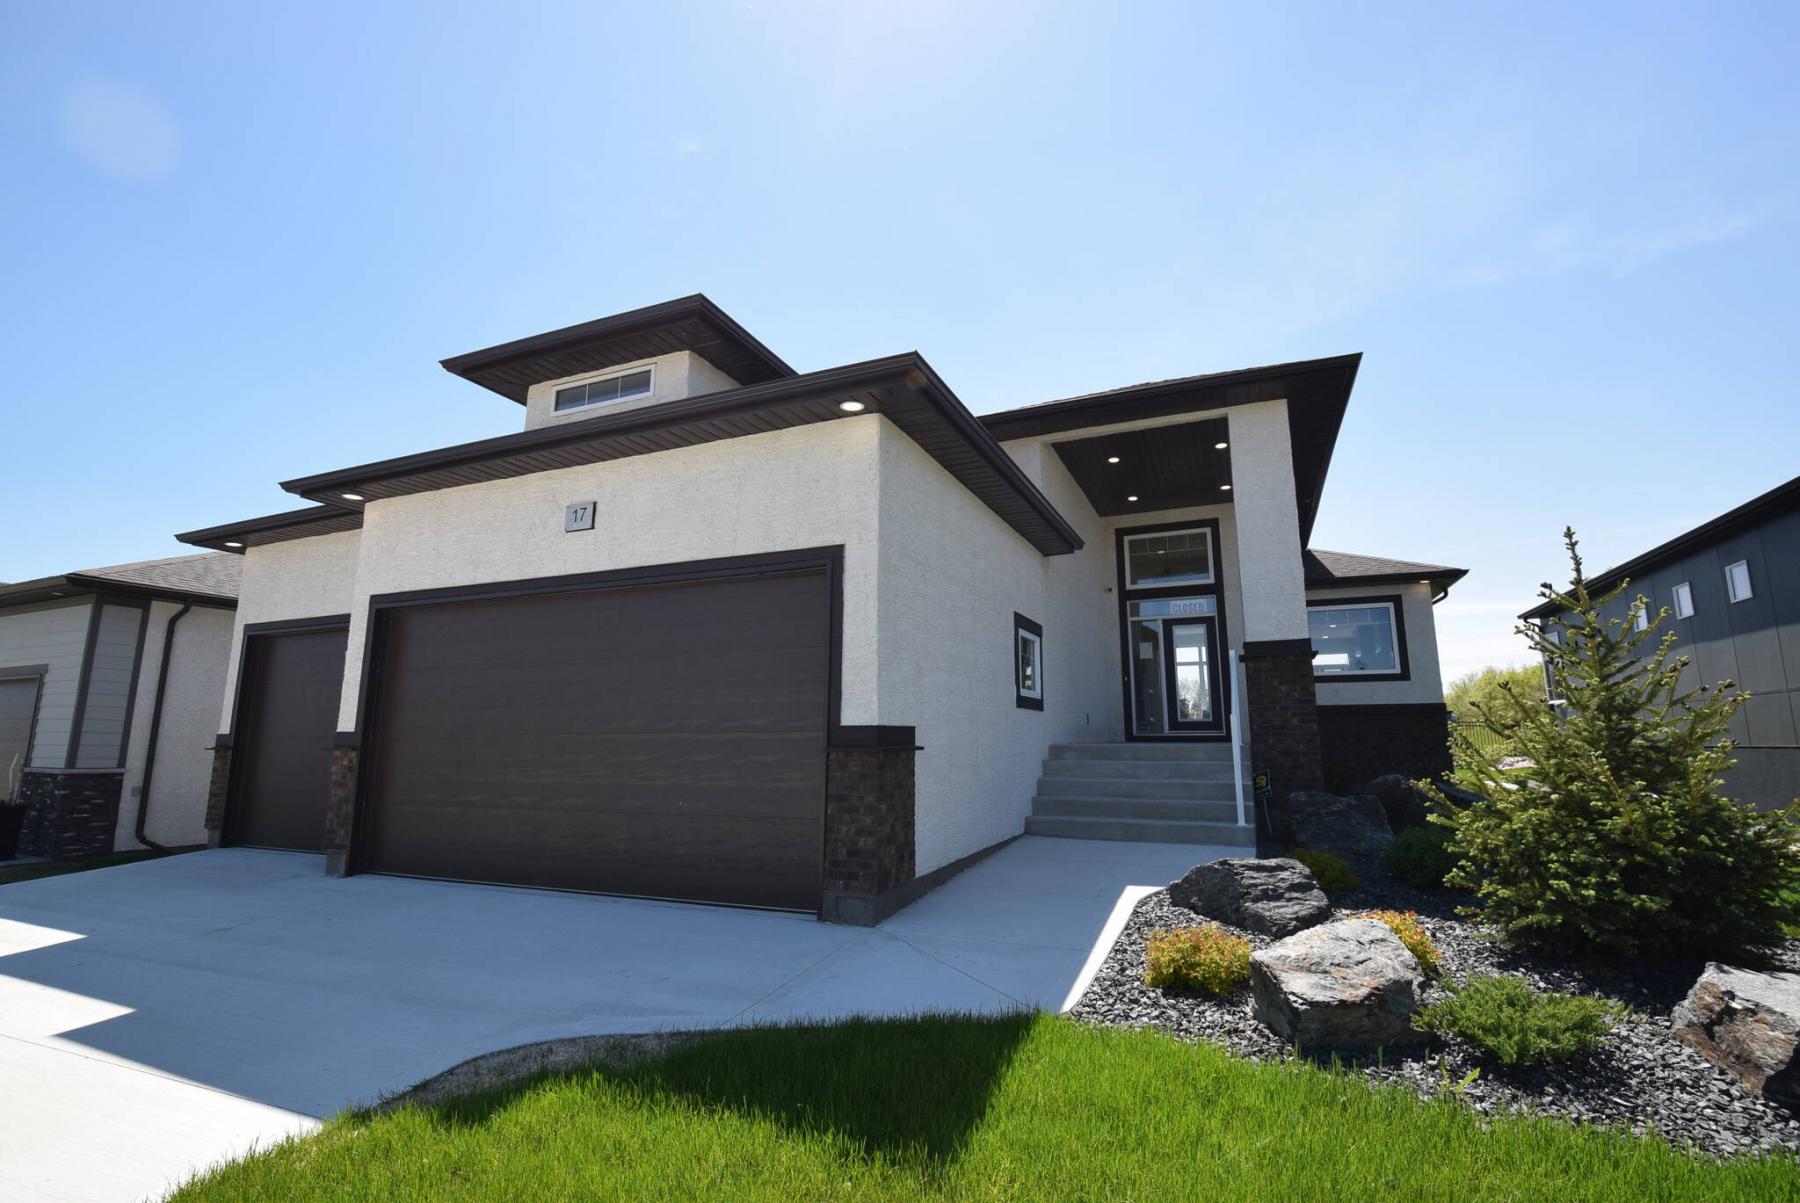 <p>Todd Lewys / Winnipeg Free Press</p><p>Situated on a country-sized 57-foot by 130-foot lot, the 1,688 sq. ft. Yorkton IV is a beautifully-designed bungalow that offers families a perfect balance of style and livability.</p>